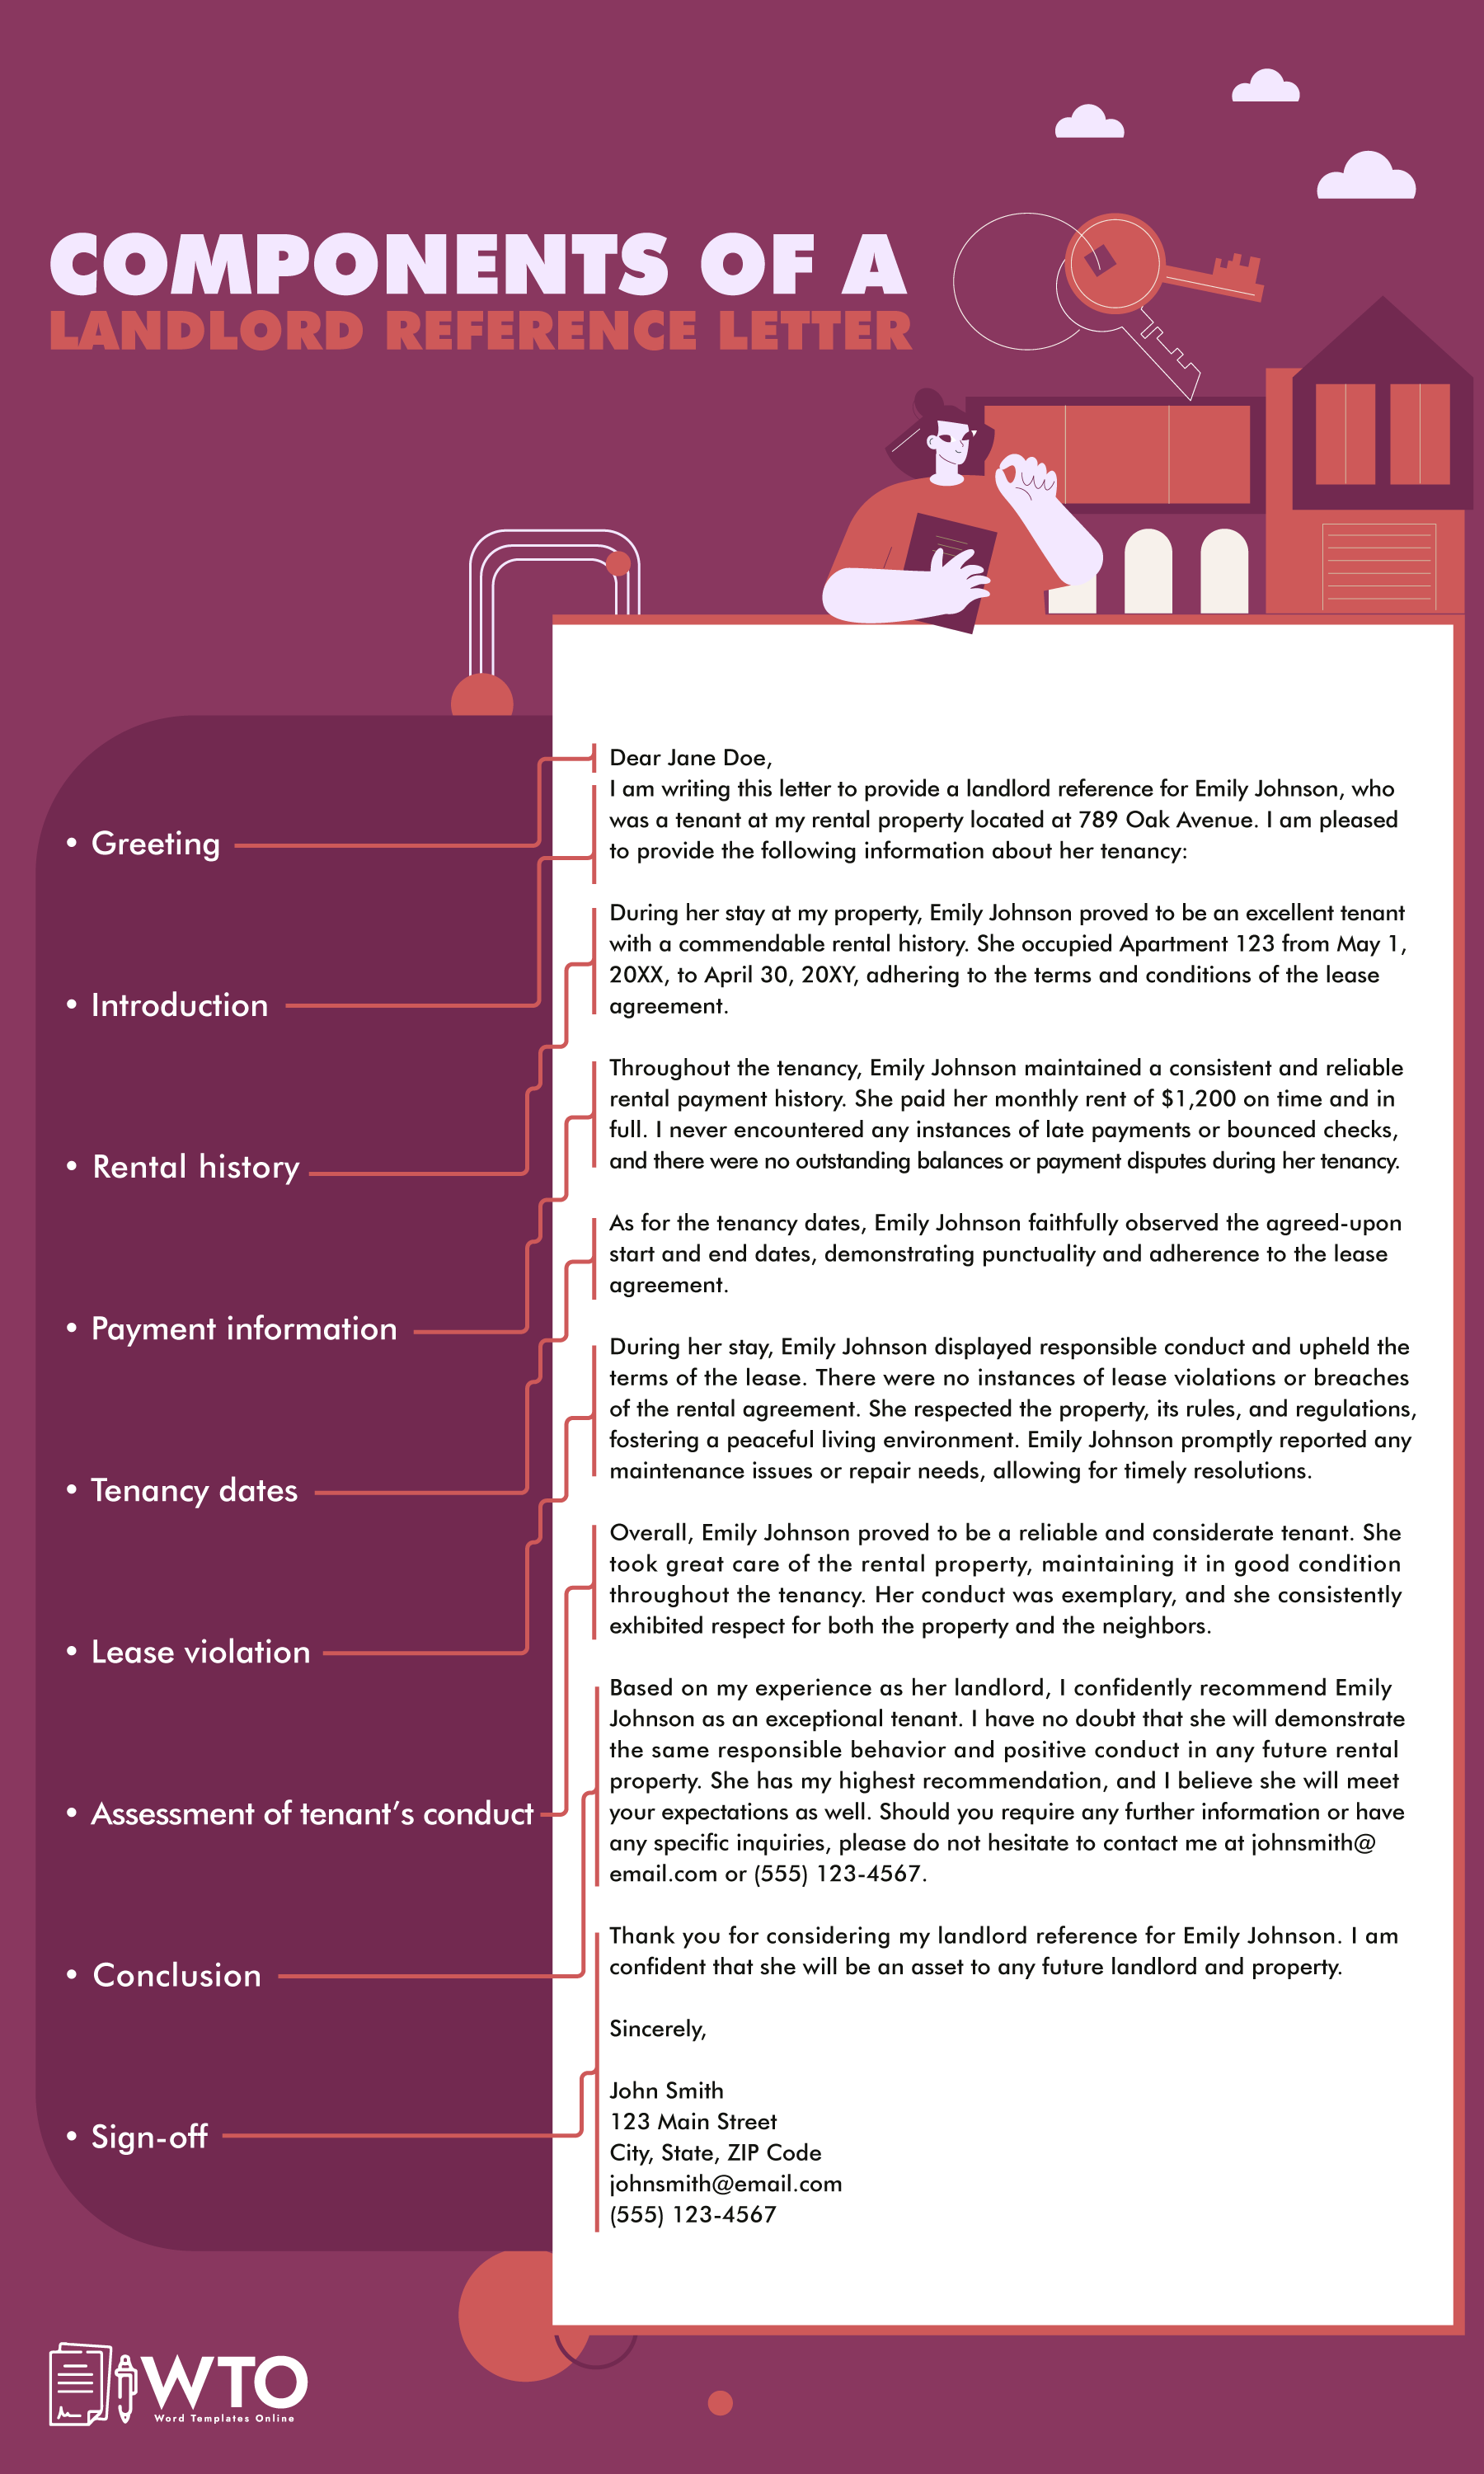 This infographic is about components of landlord reference letter. 